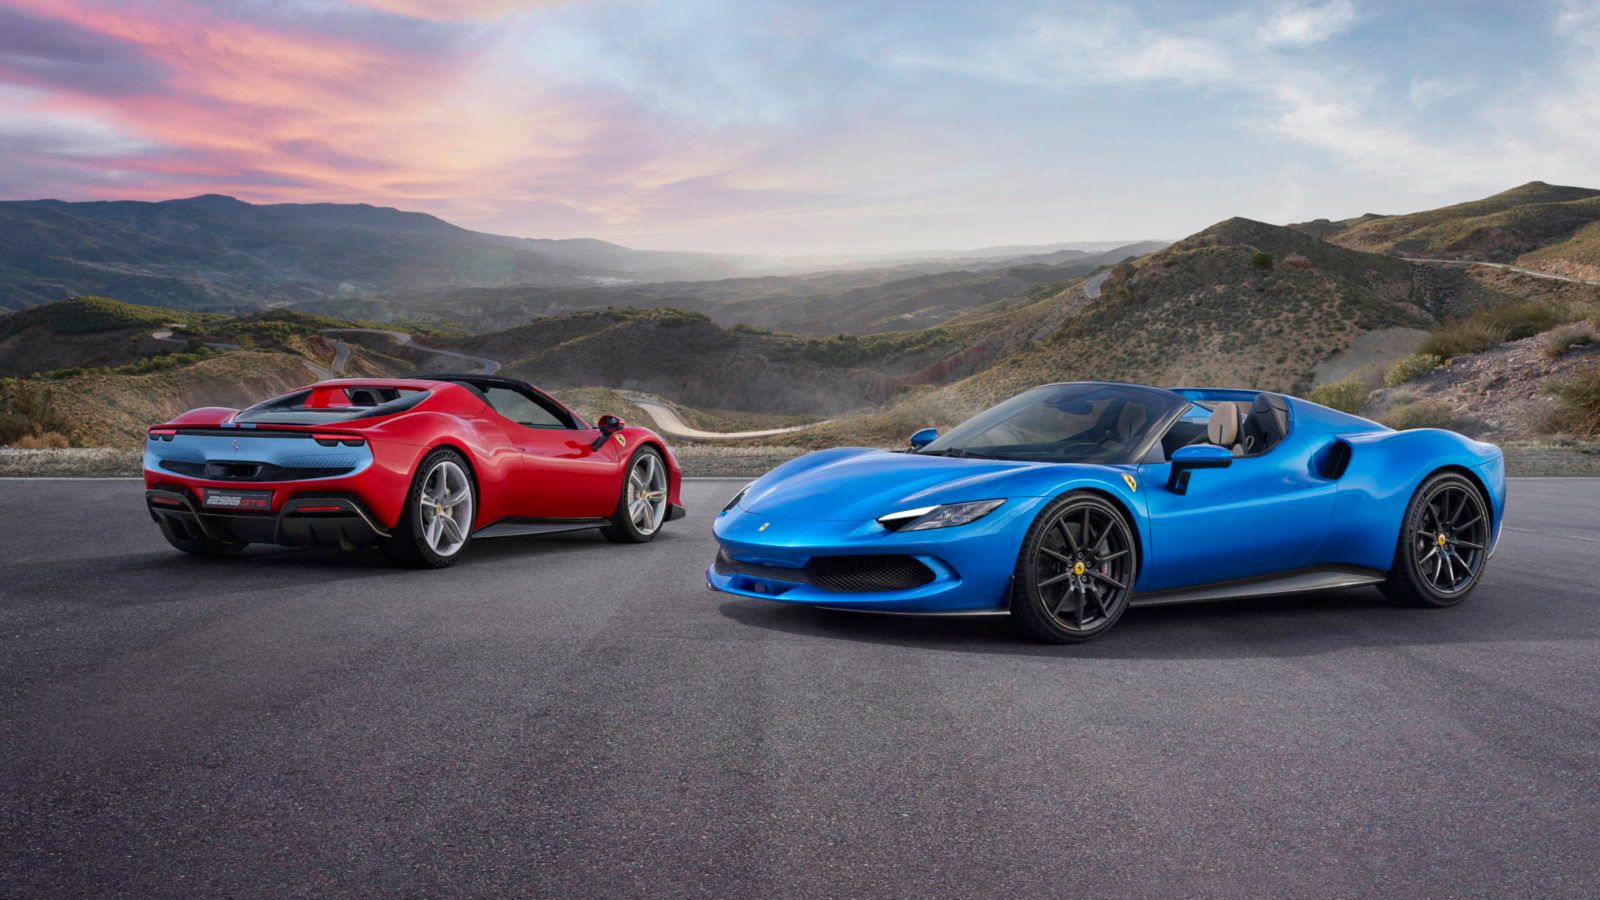 Ferrari ushers in a new era of performance driving with the 296 GTS